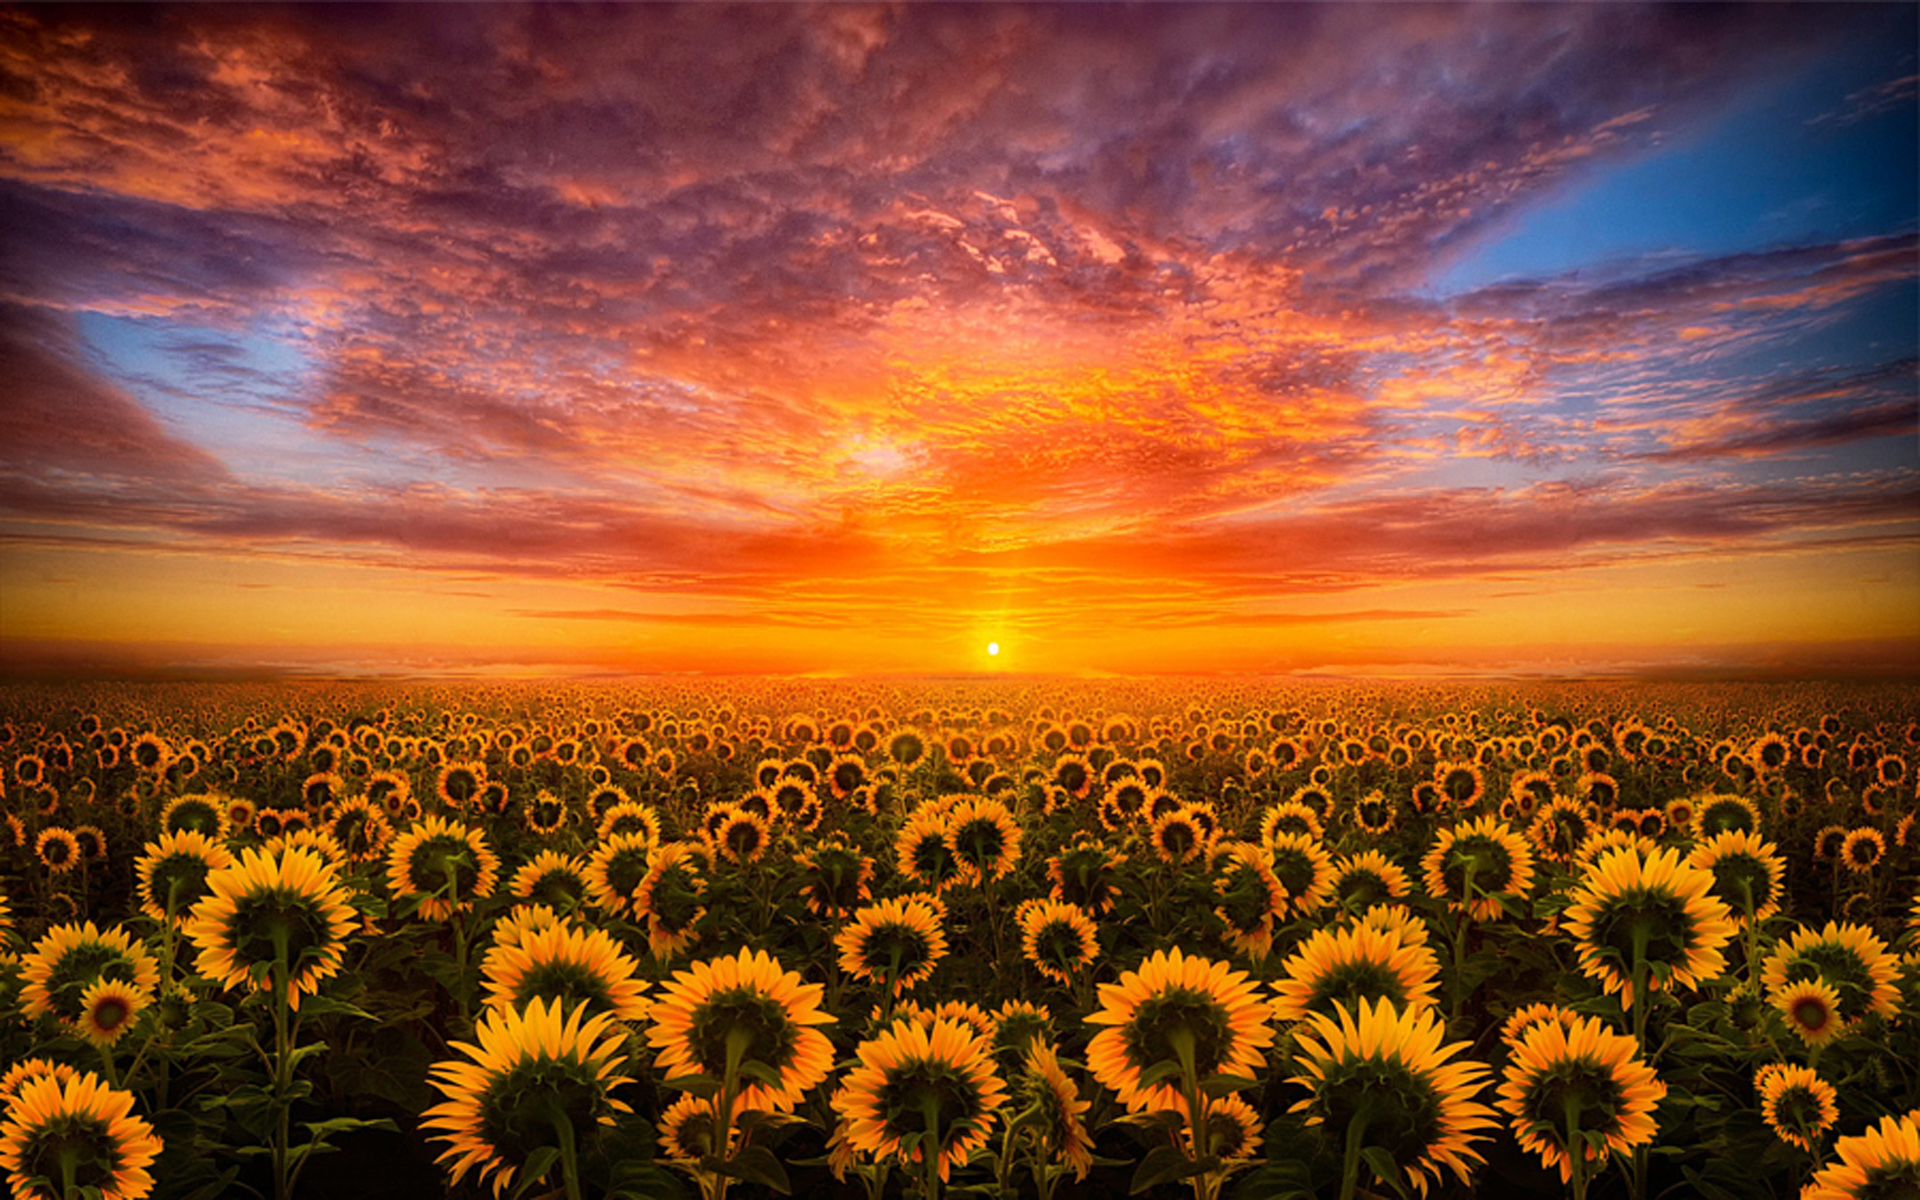 Sunset Red Sky Cloud Field With Sunflower Hd Desktop Wallpaper For Mobile :  